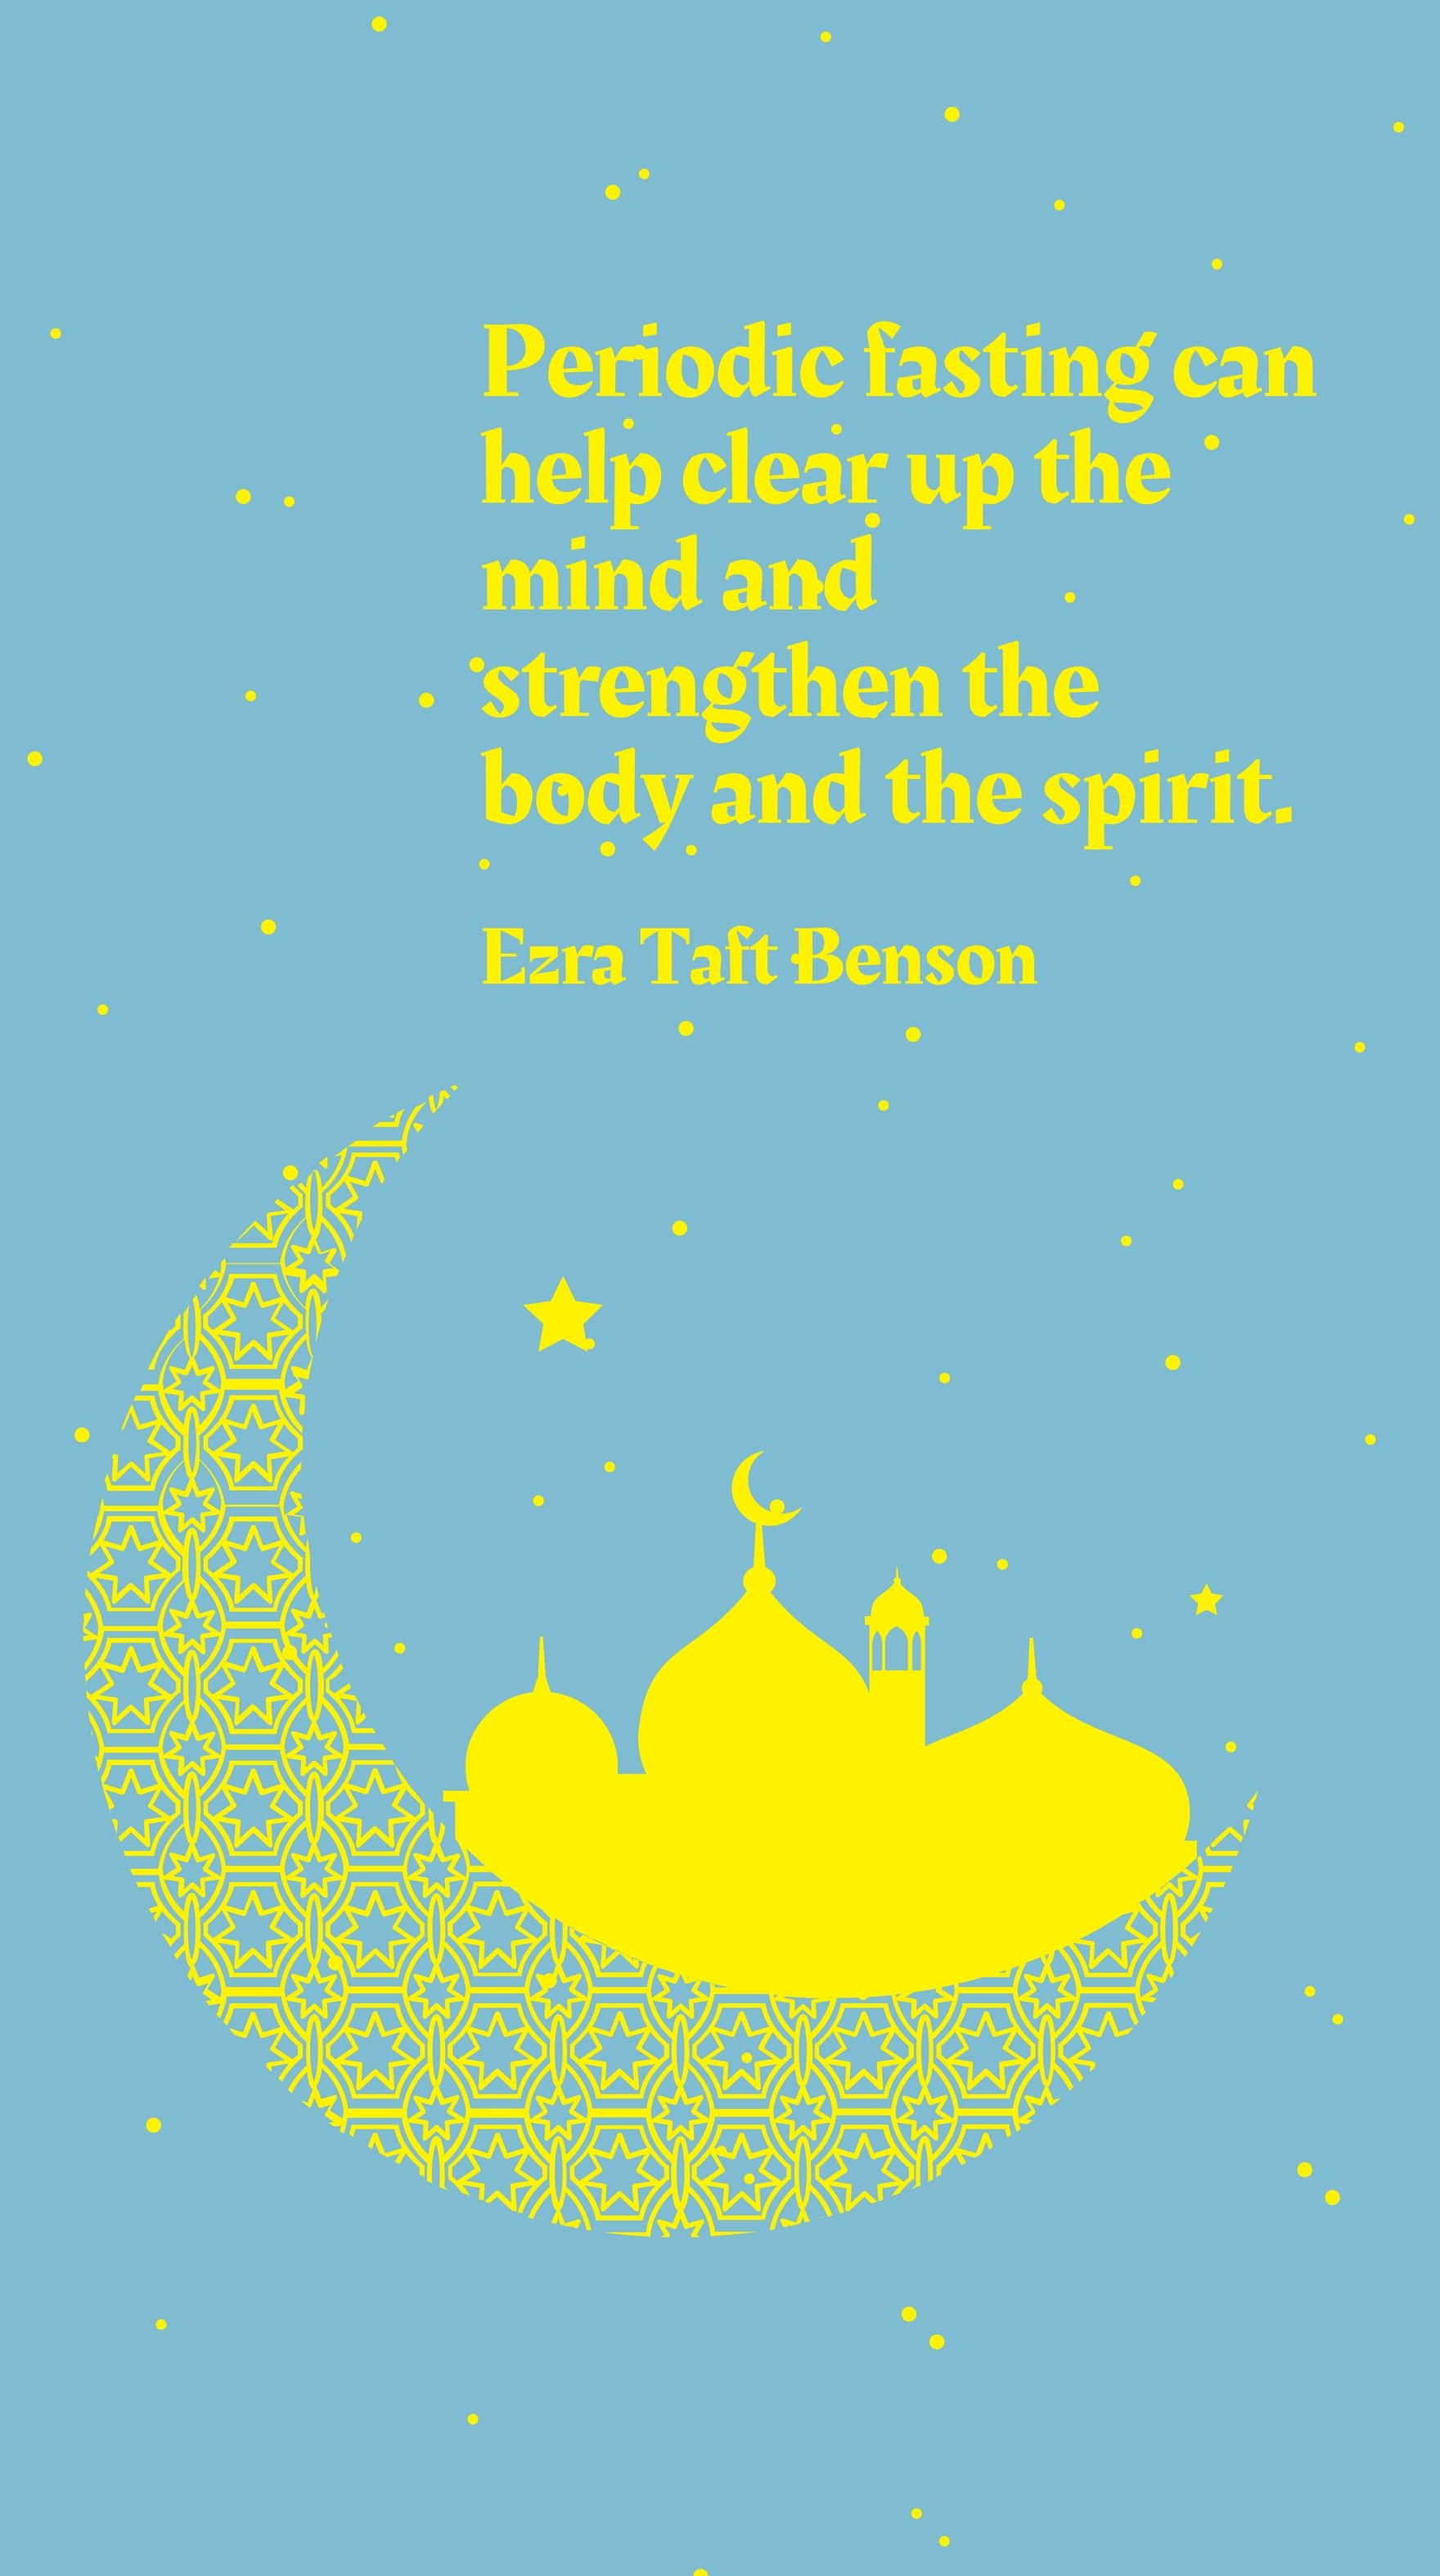 Ezra Taft Benson - Periodic fasting can help clear up the mind and strengthen the body and the spirit.